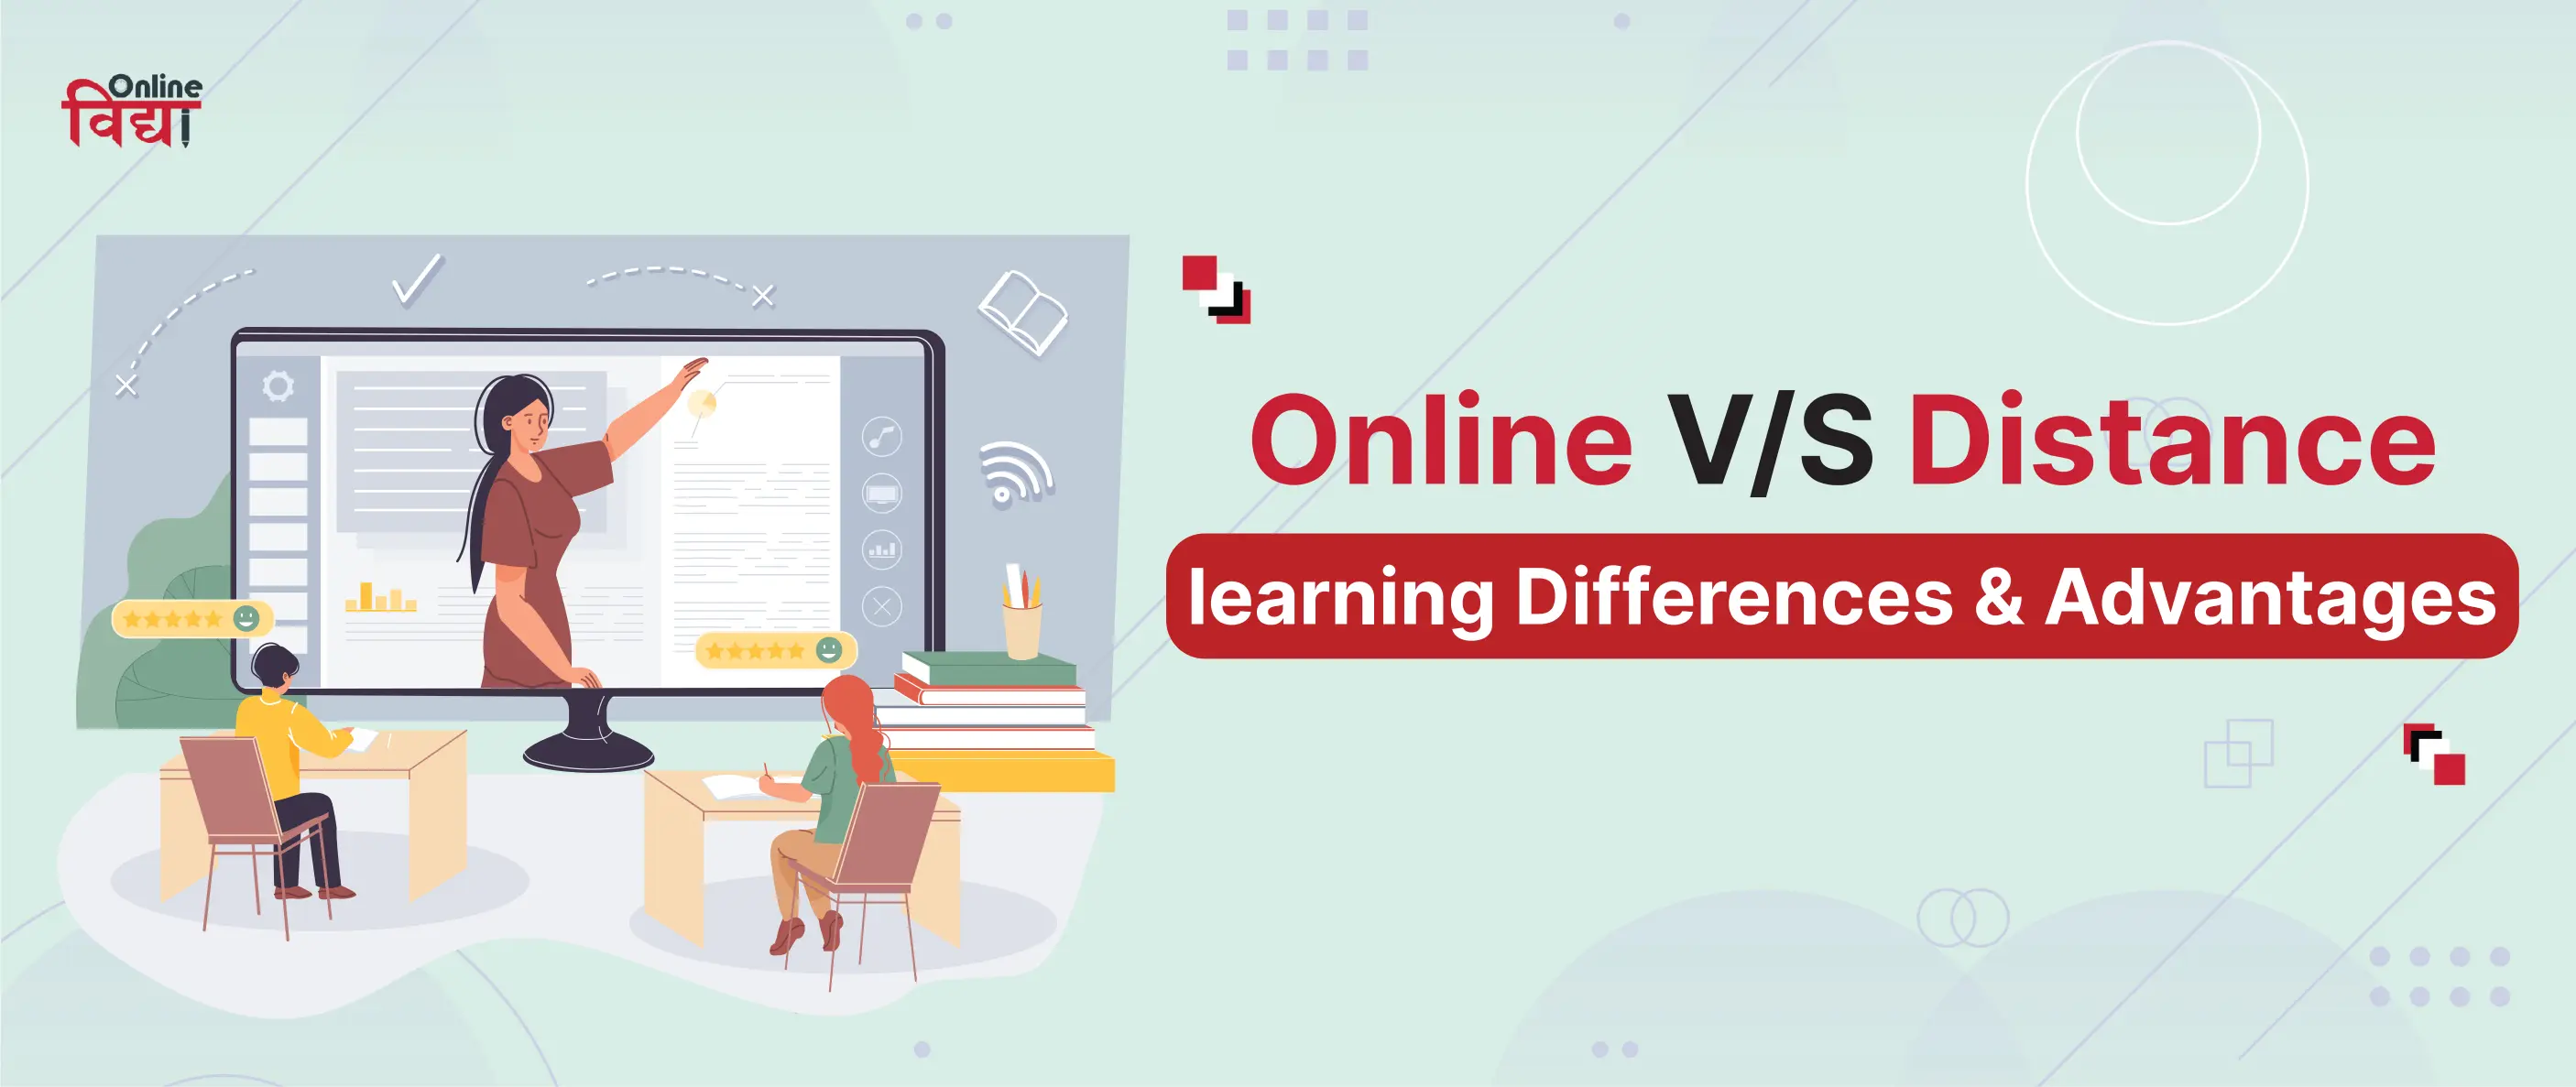 Online V/S Distance Learning Differences & Advantages